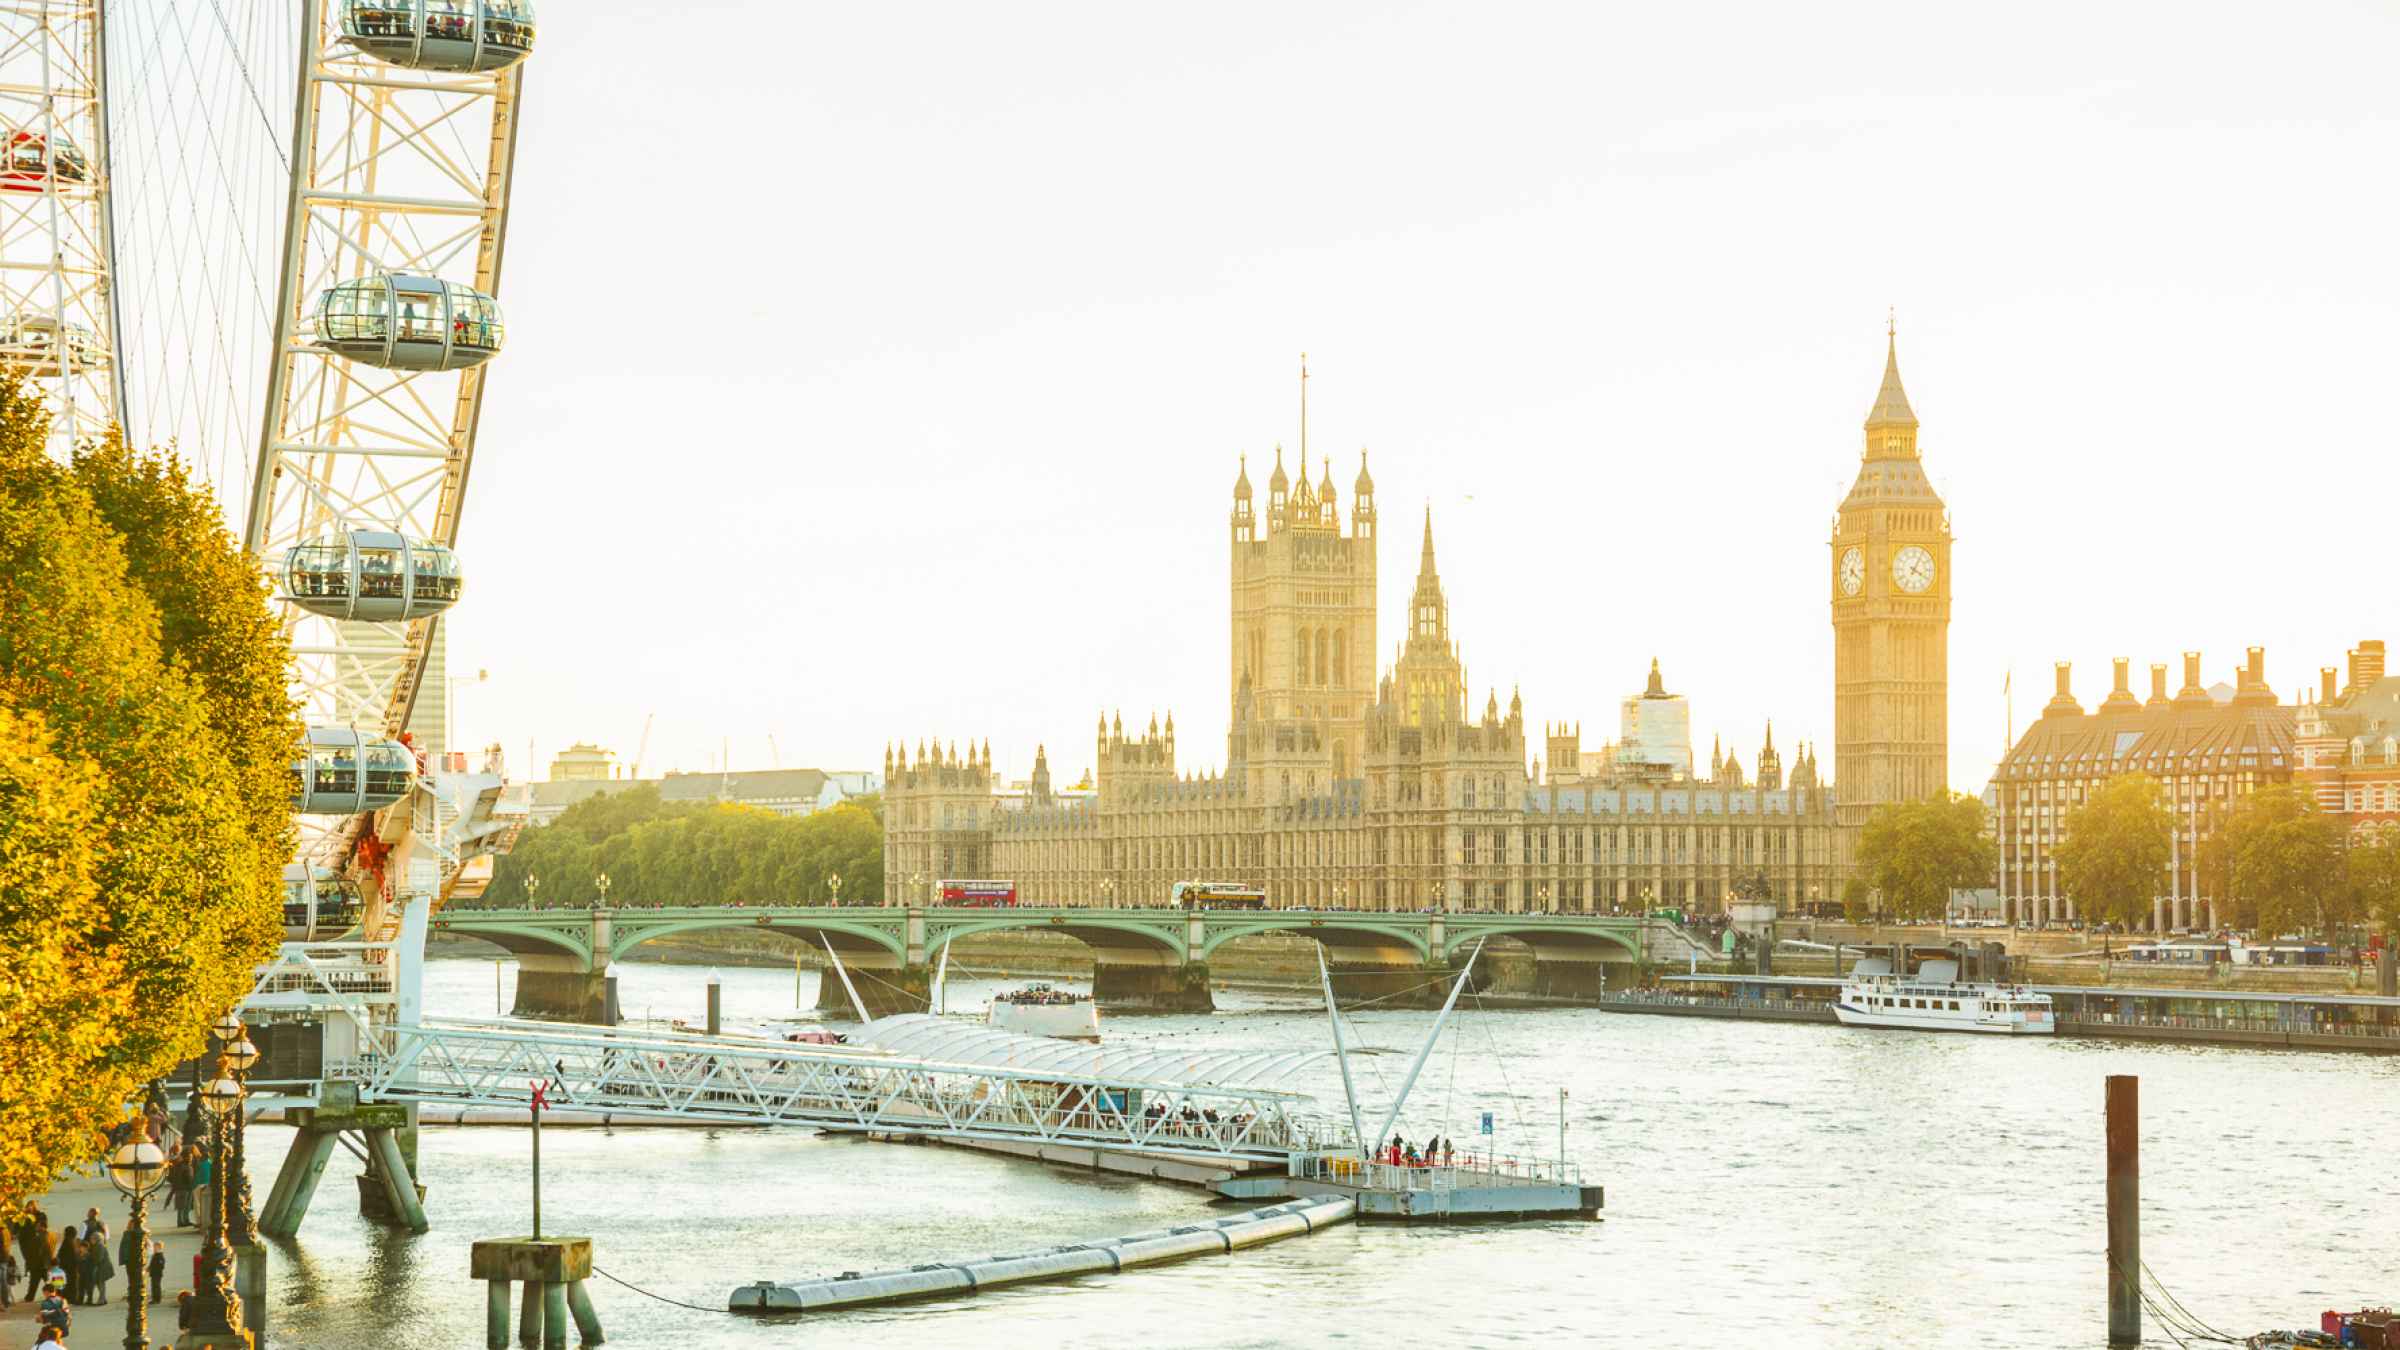 london boat tours westminster